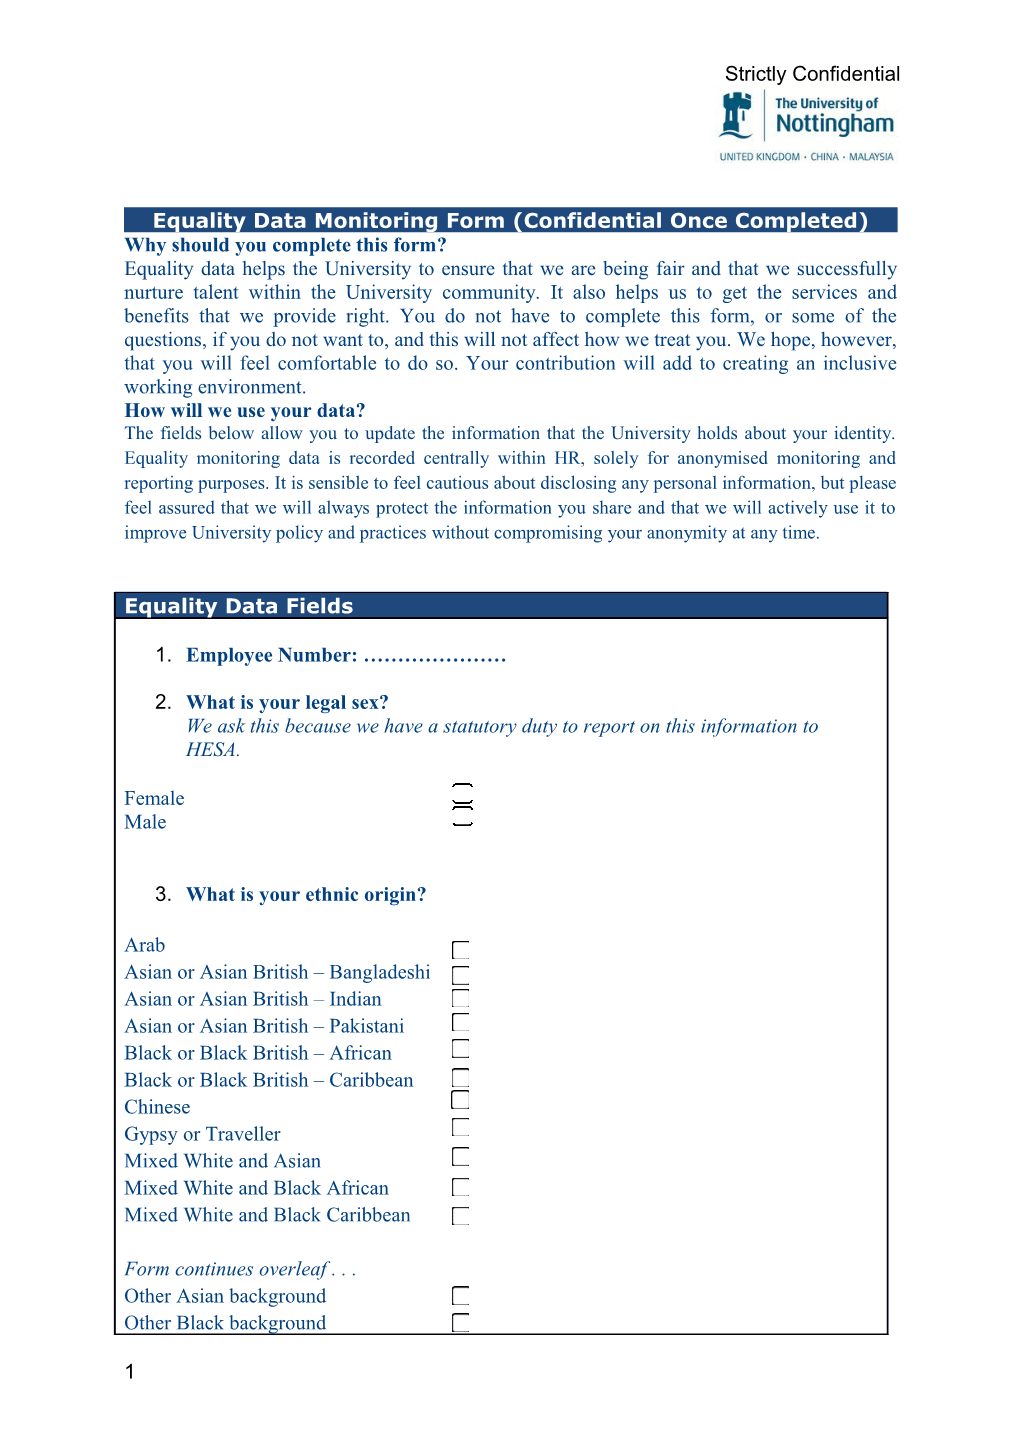 Equality Data Monitoring Form (Confidential Once Completed)